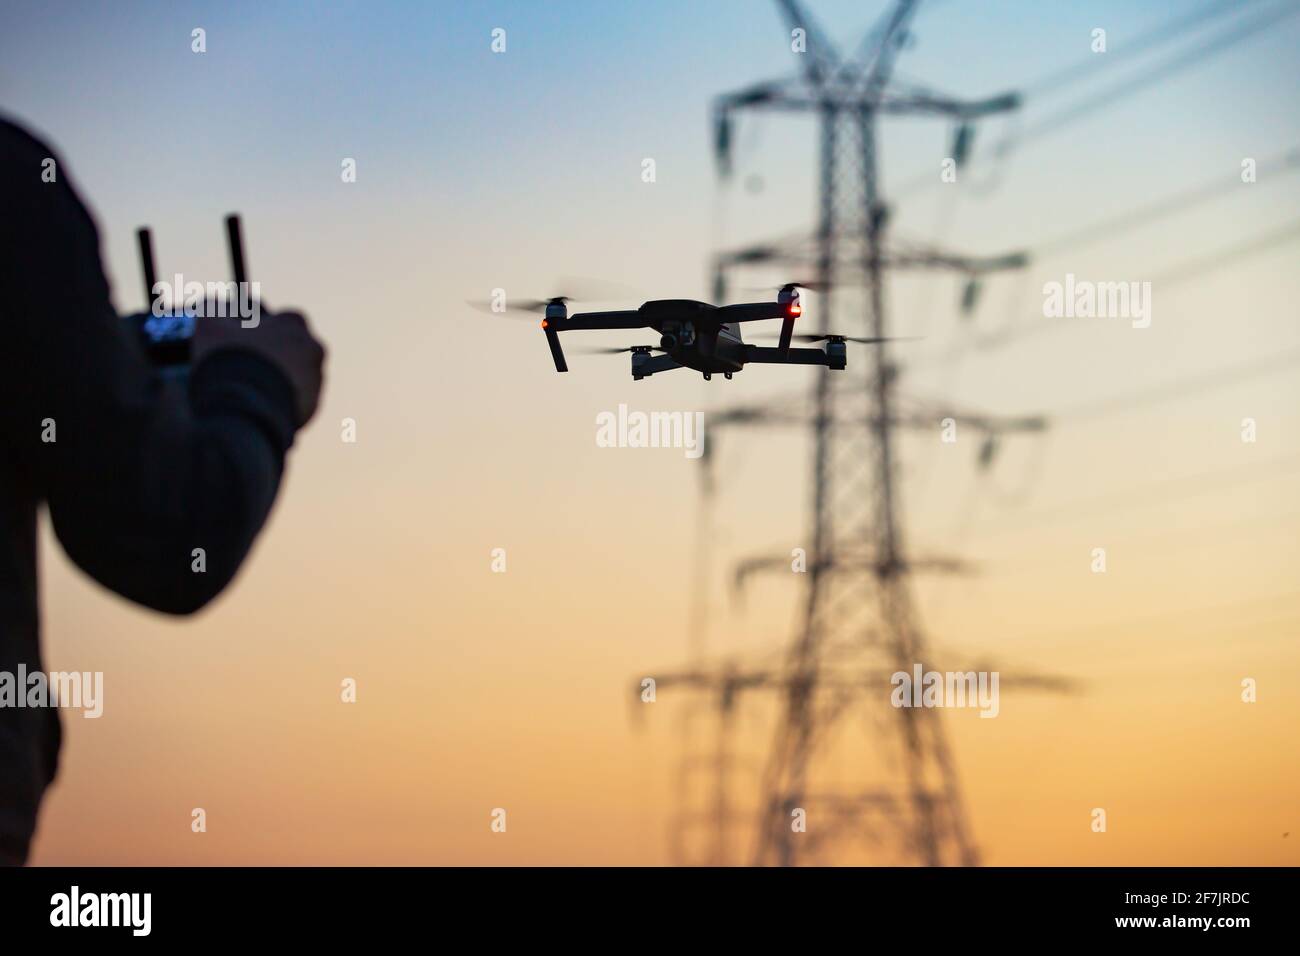 A concept of a man flying a drone collecting a data remotely from a power tower station or for telecommunication. Drone safety, power lines. Stock Photo